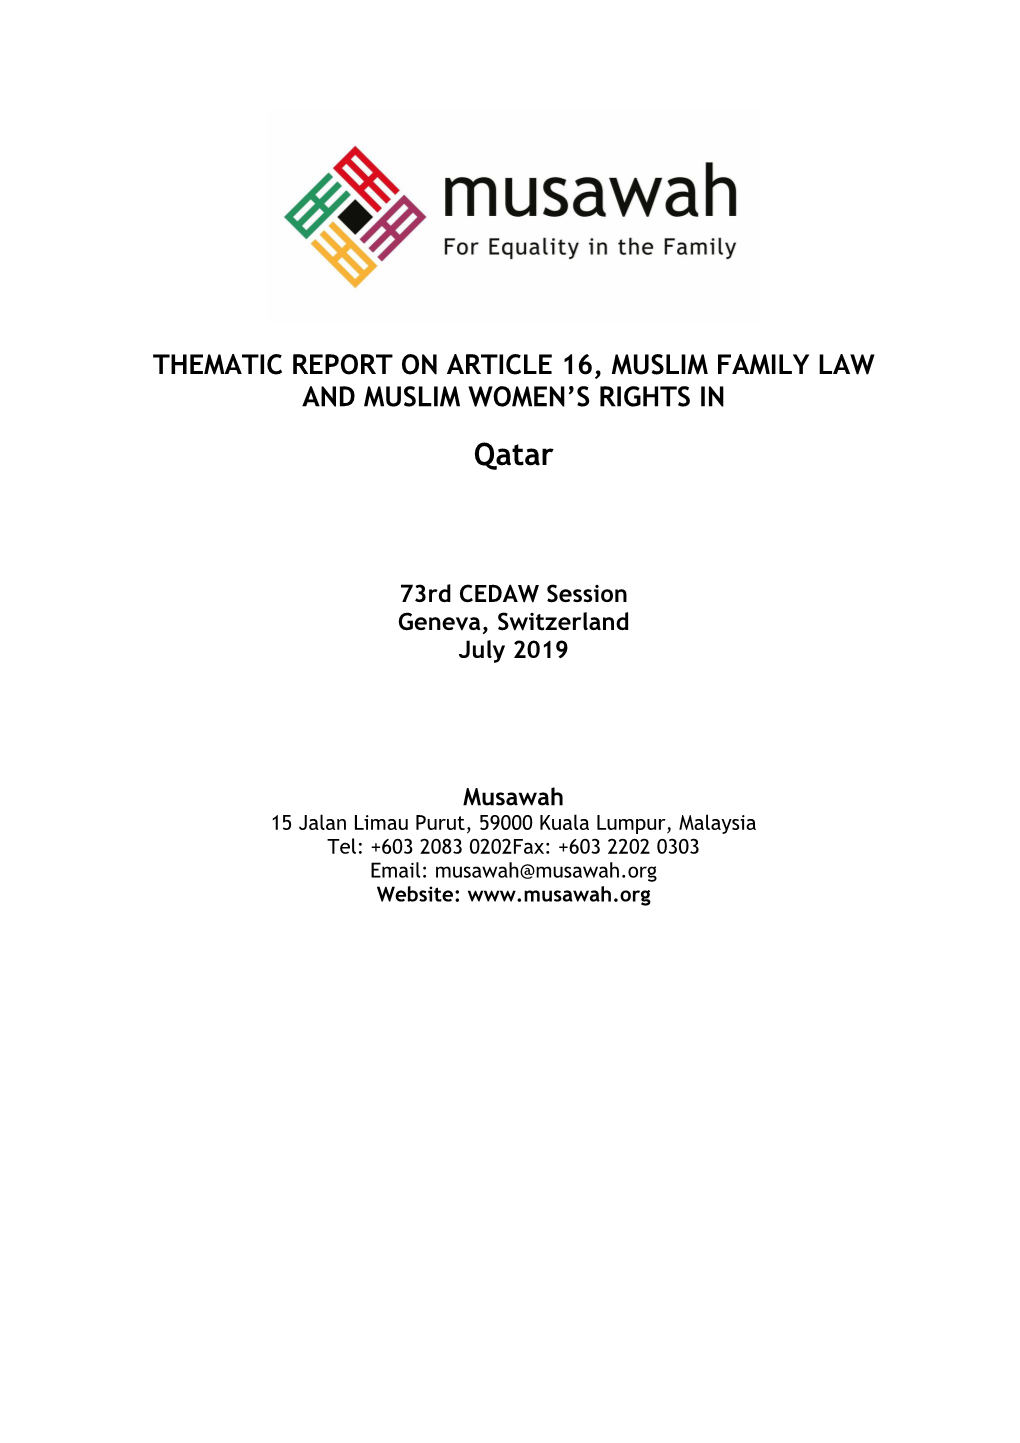 Thematic Report on Article 16, Muslim Family Law and Muslim Women's Rights In